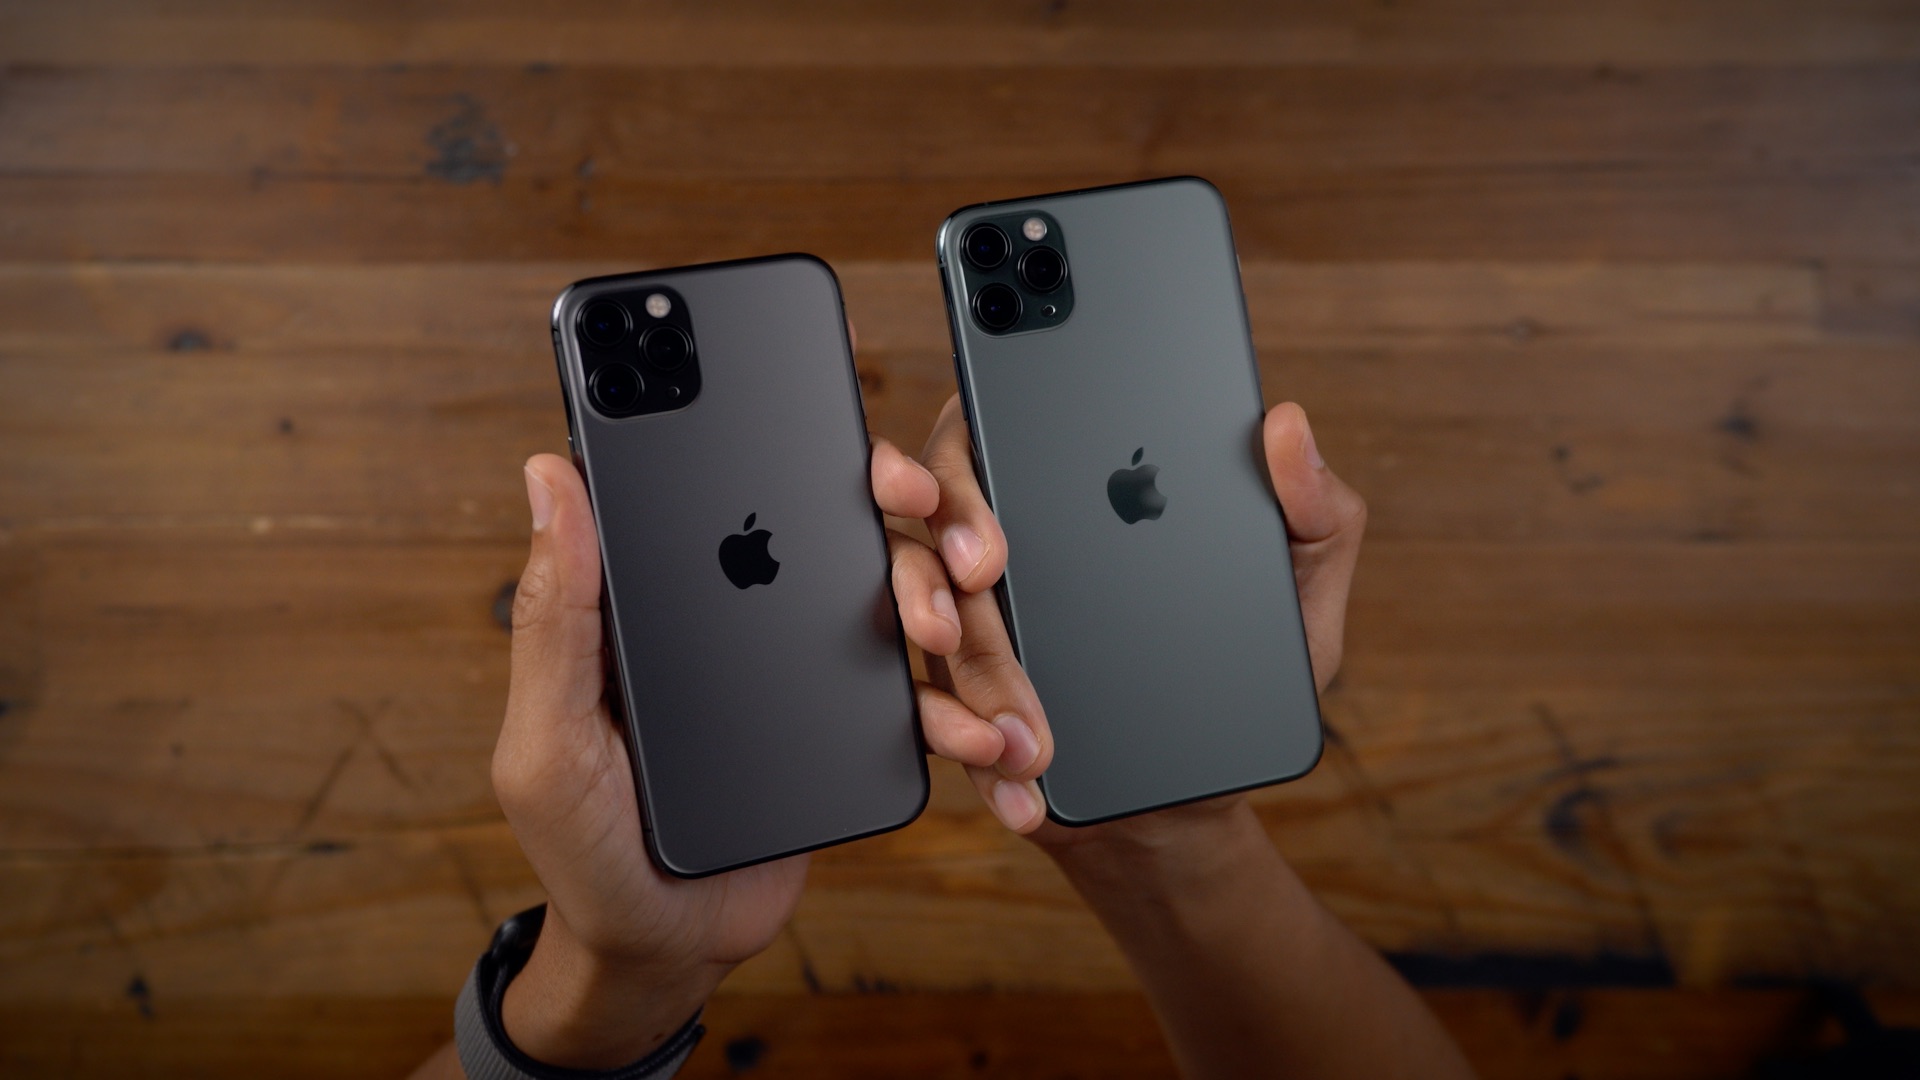 Top Iphone 11 Pro Features Built For Photo And Video